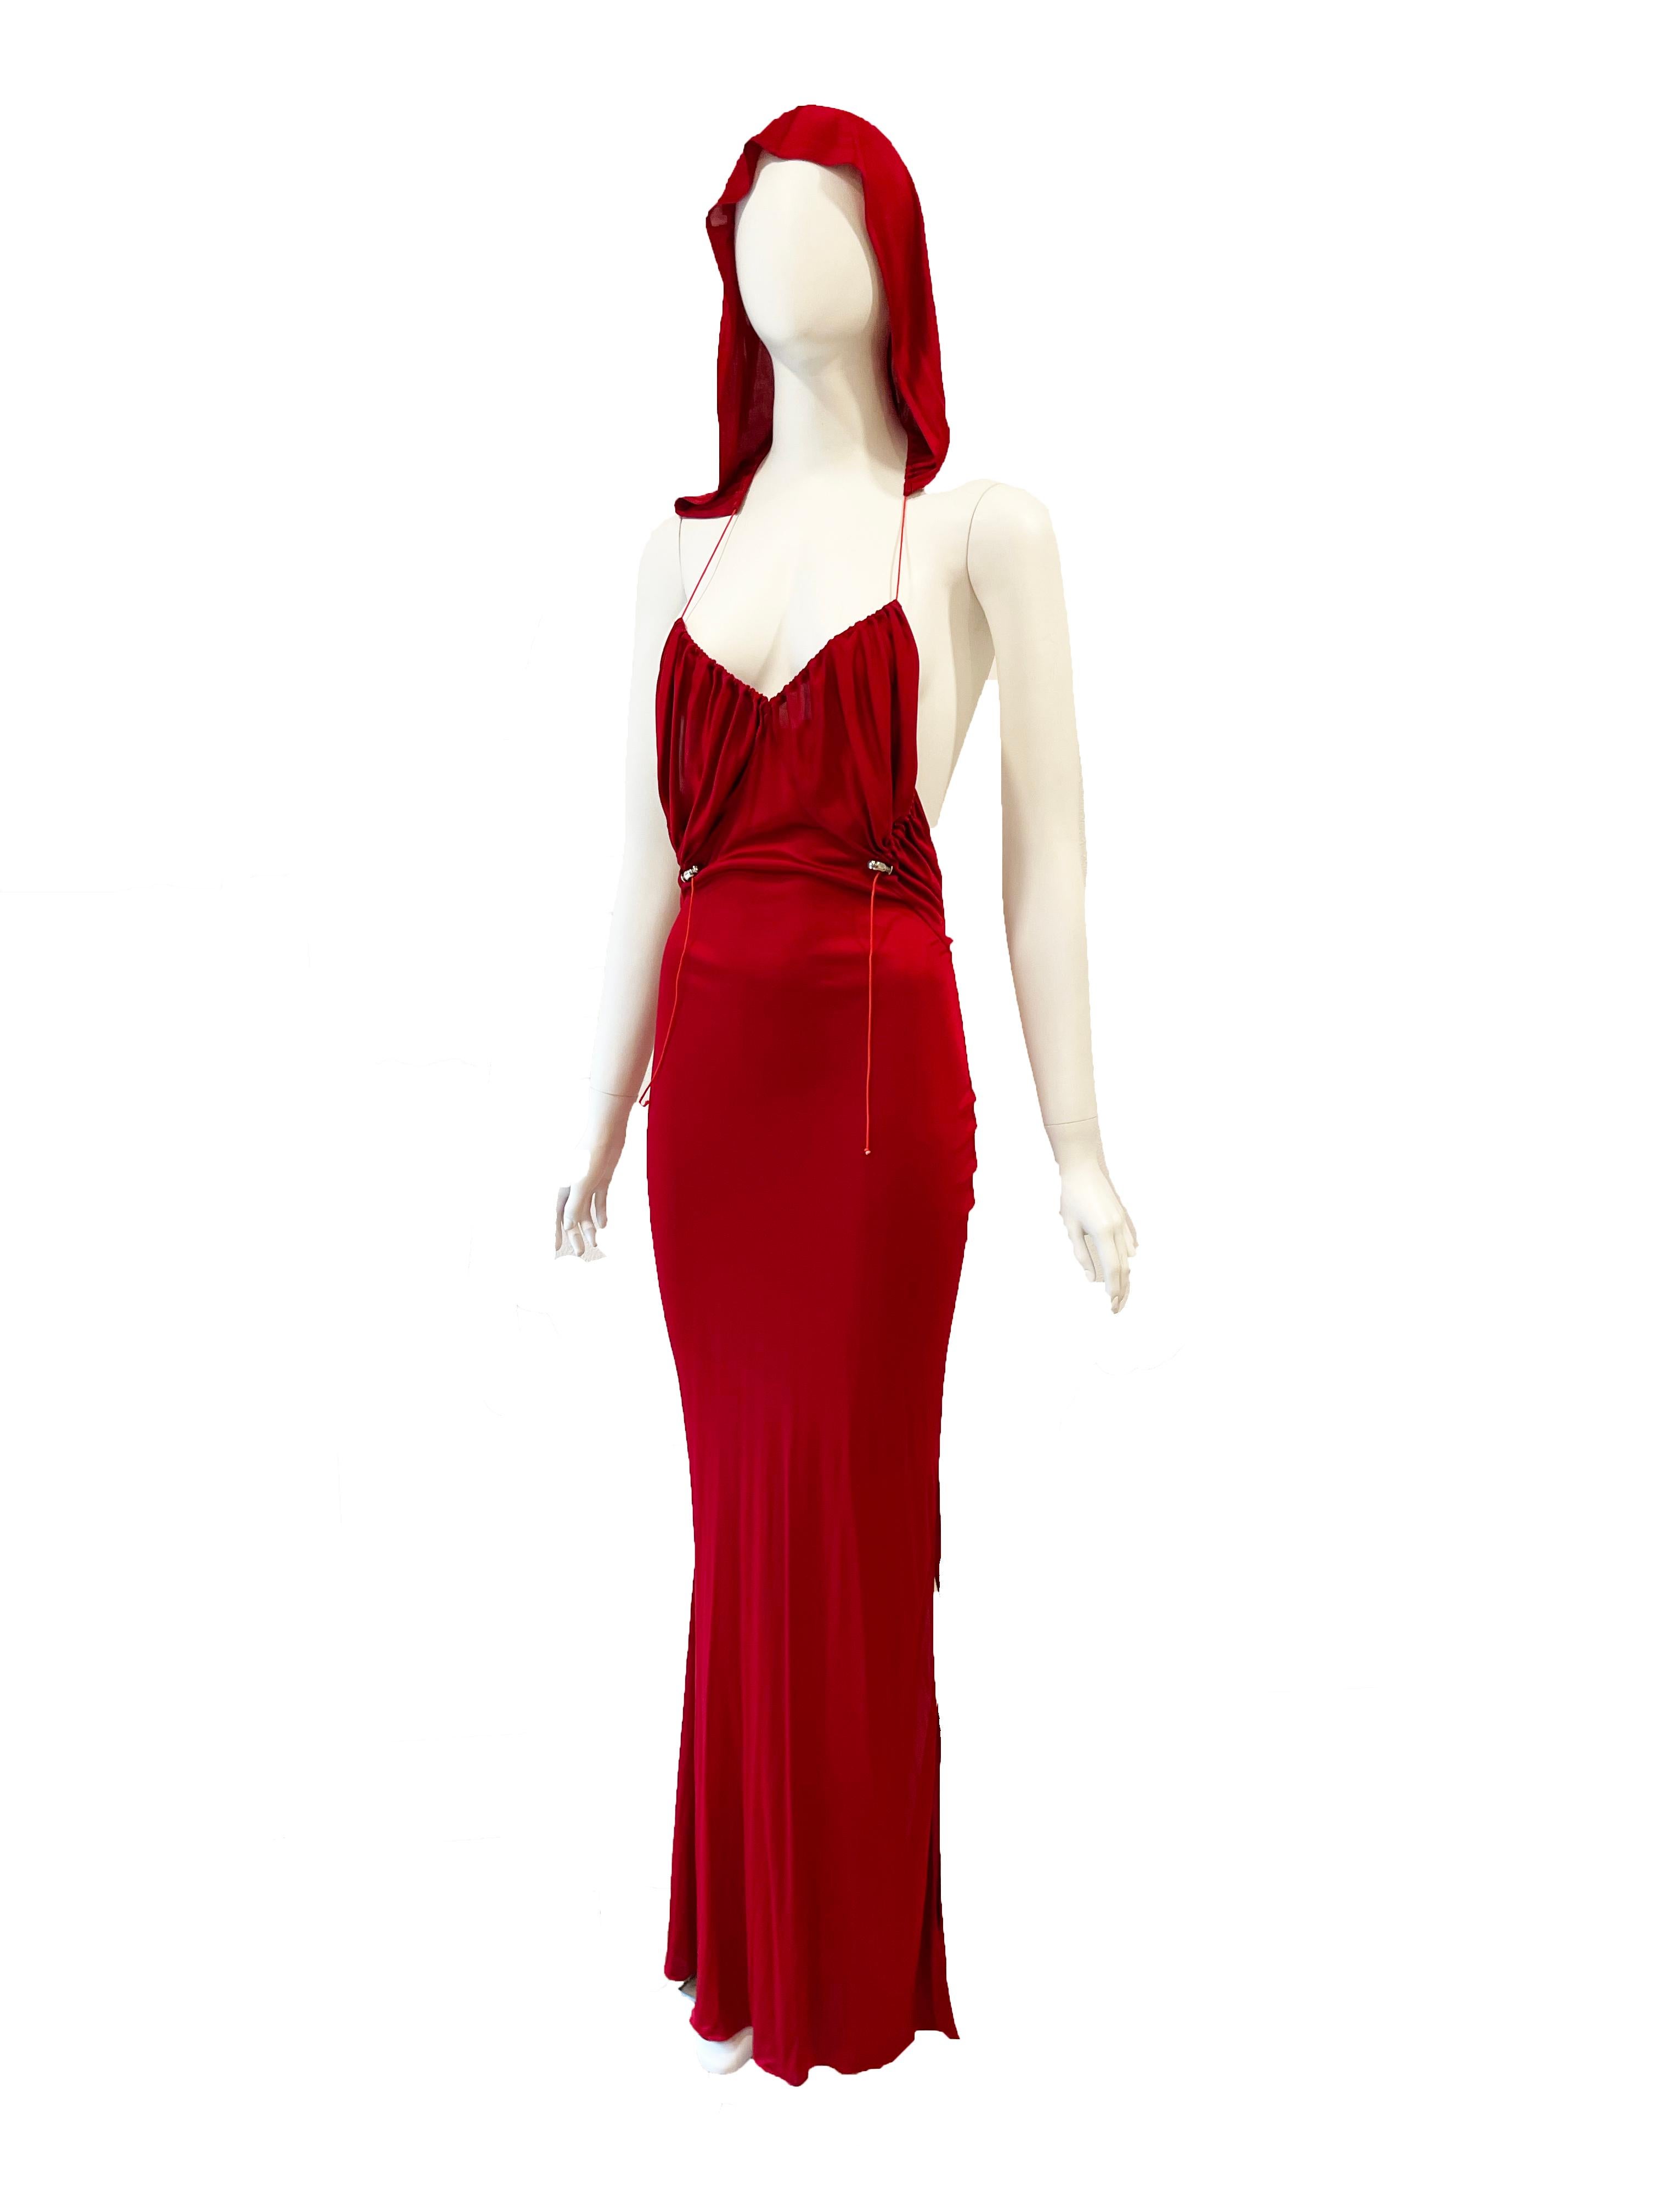 Red Galliano Hooded Evening Gown 